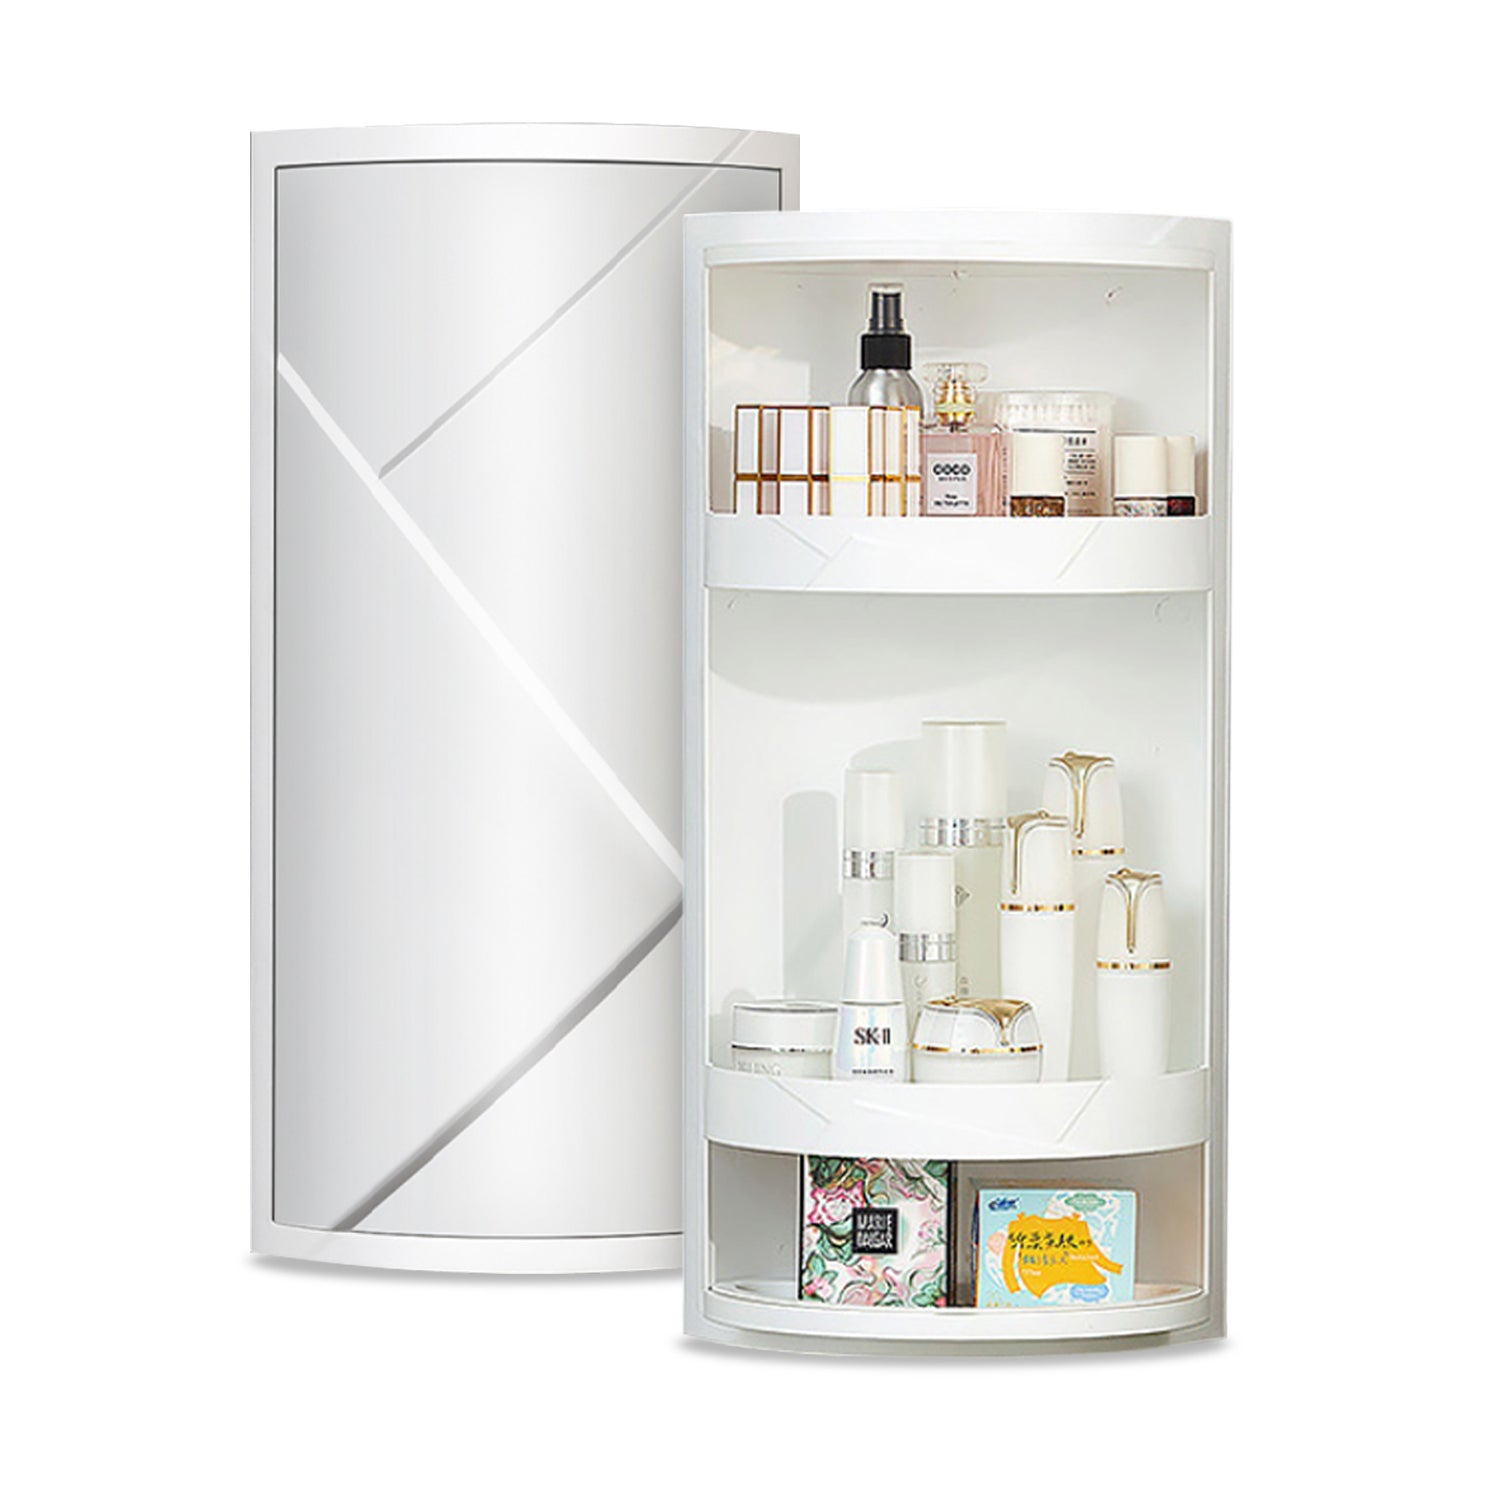 Organize your space with the Longzon shower shelf. 